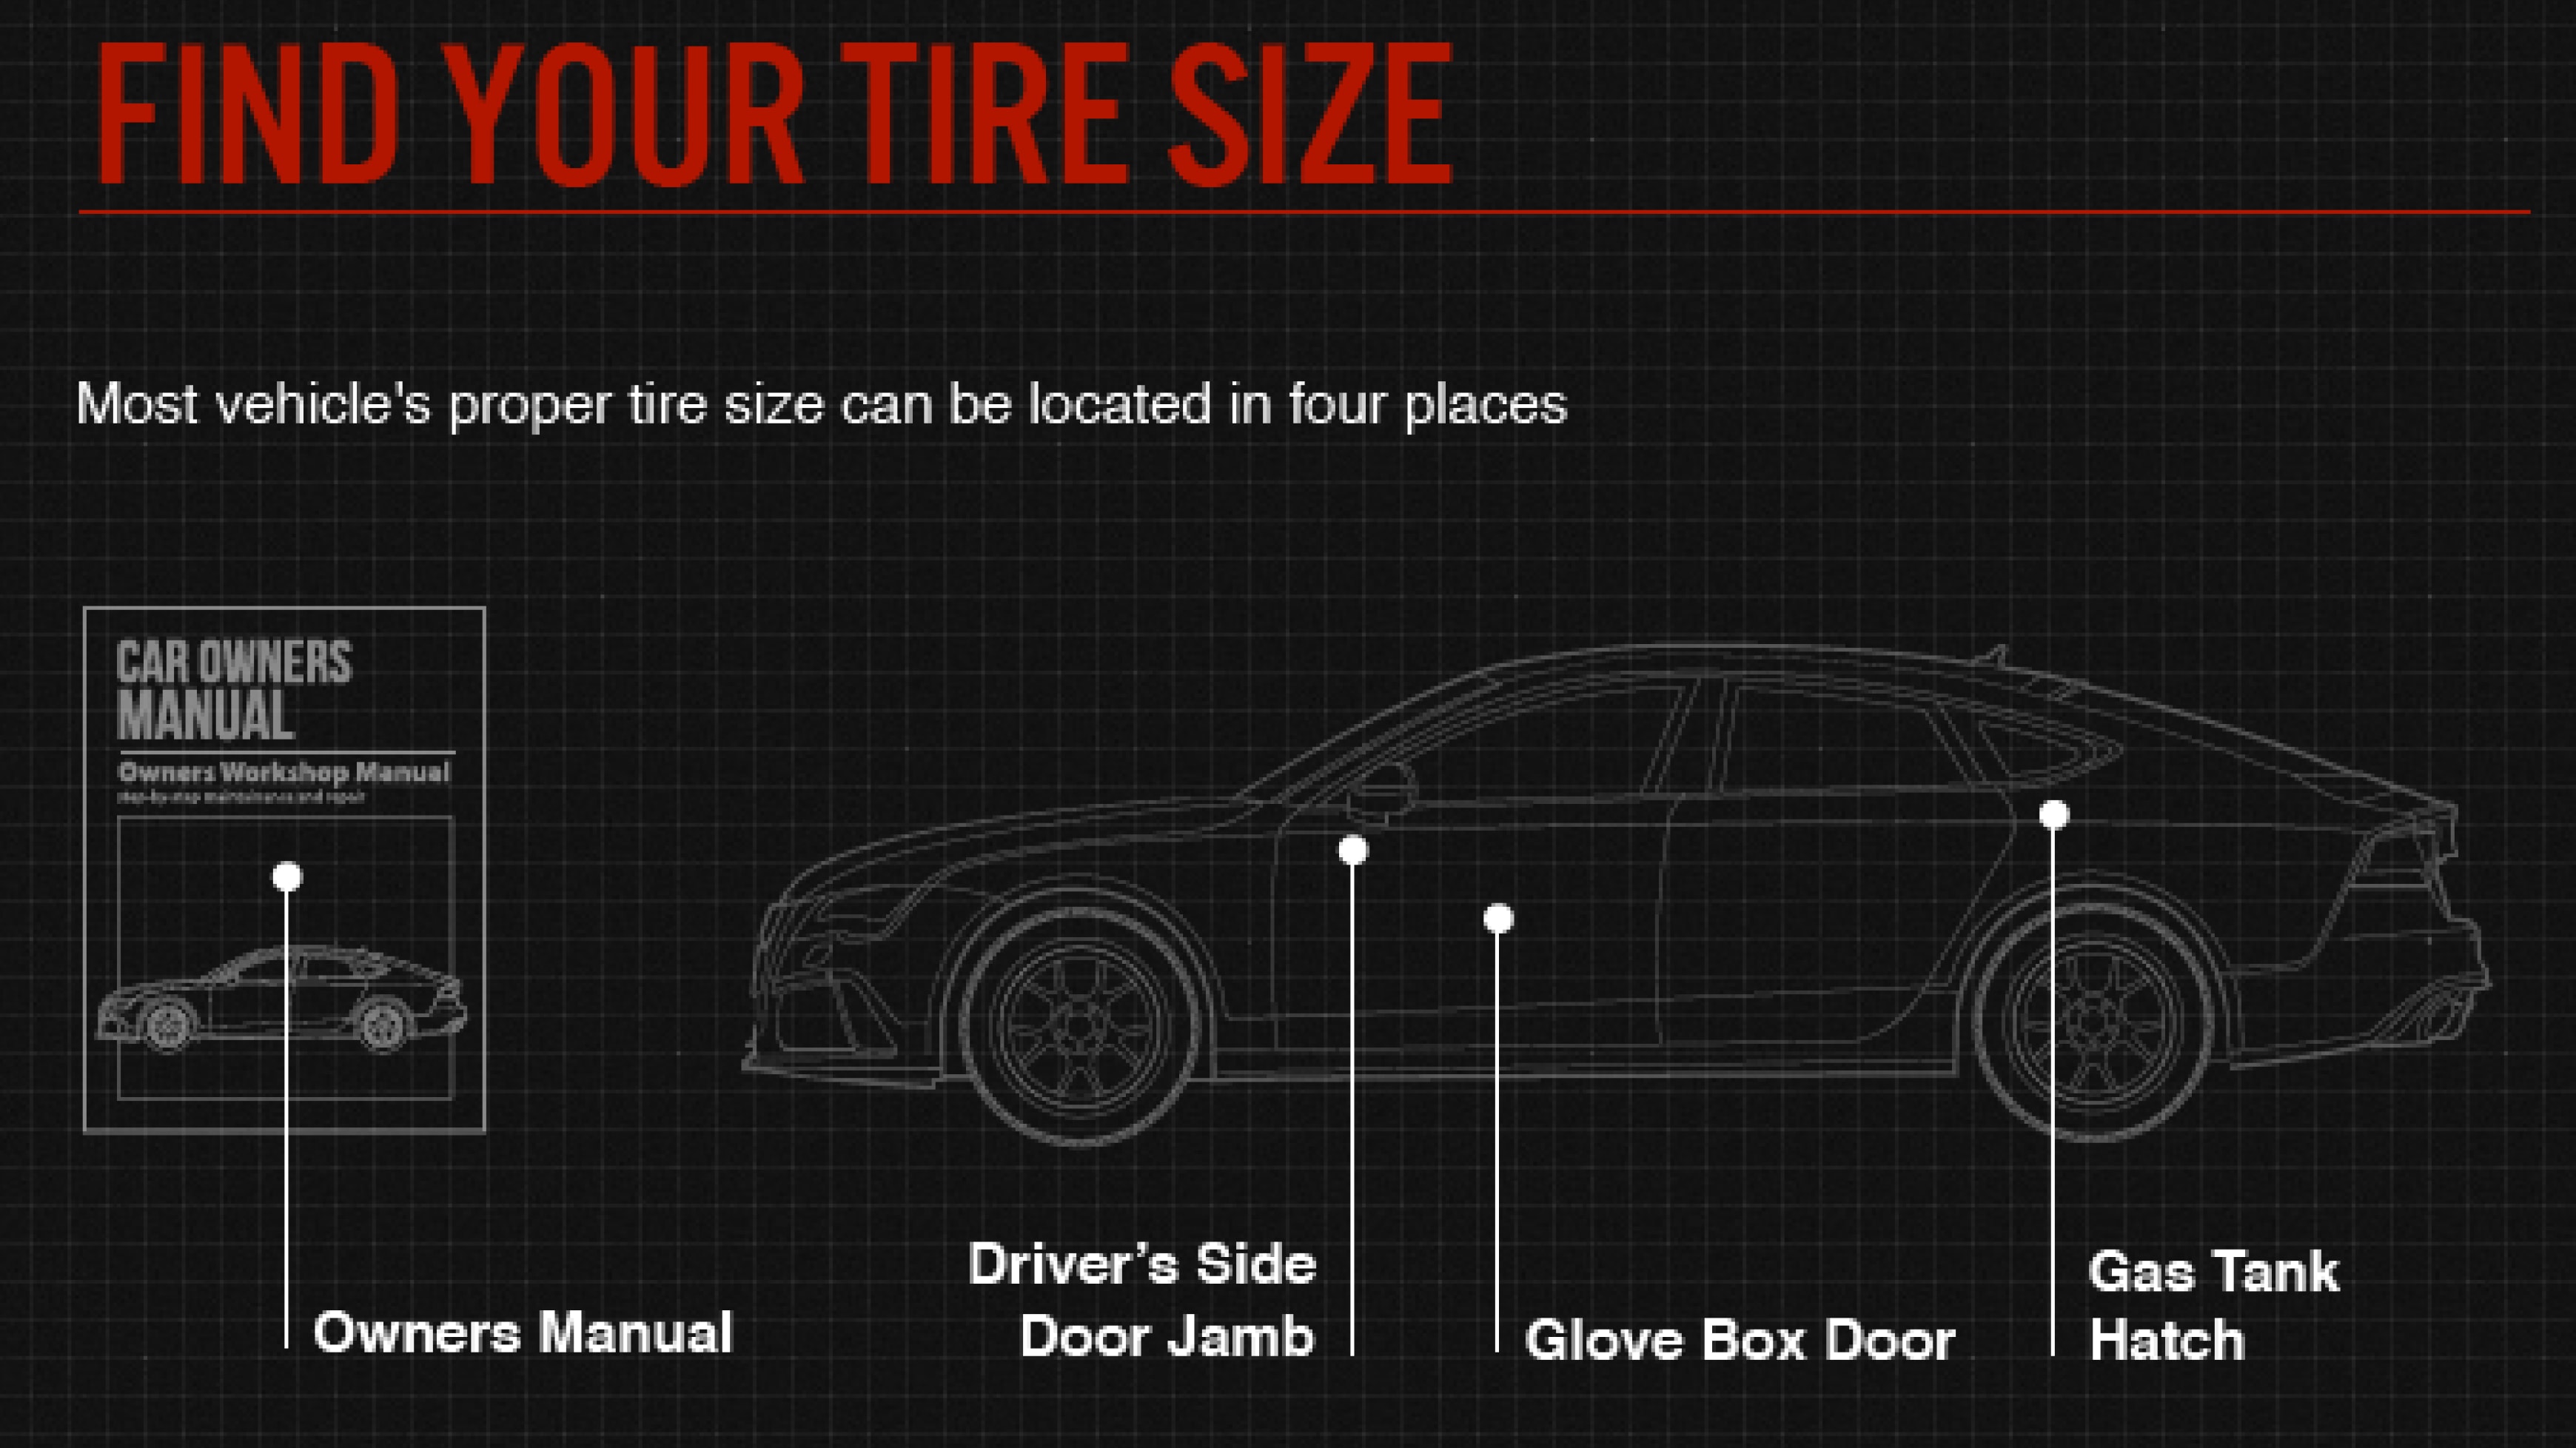 Find your tire size